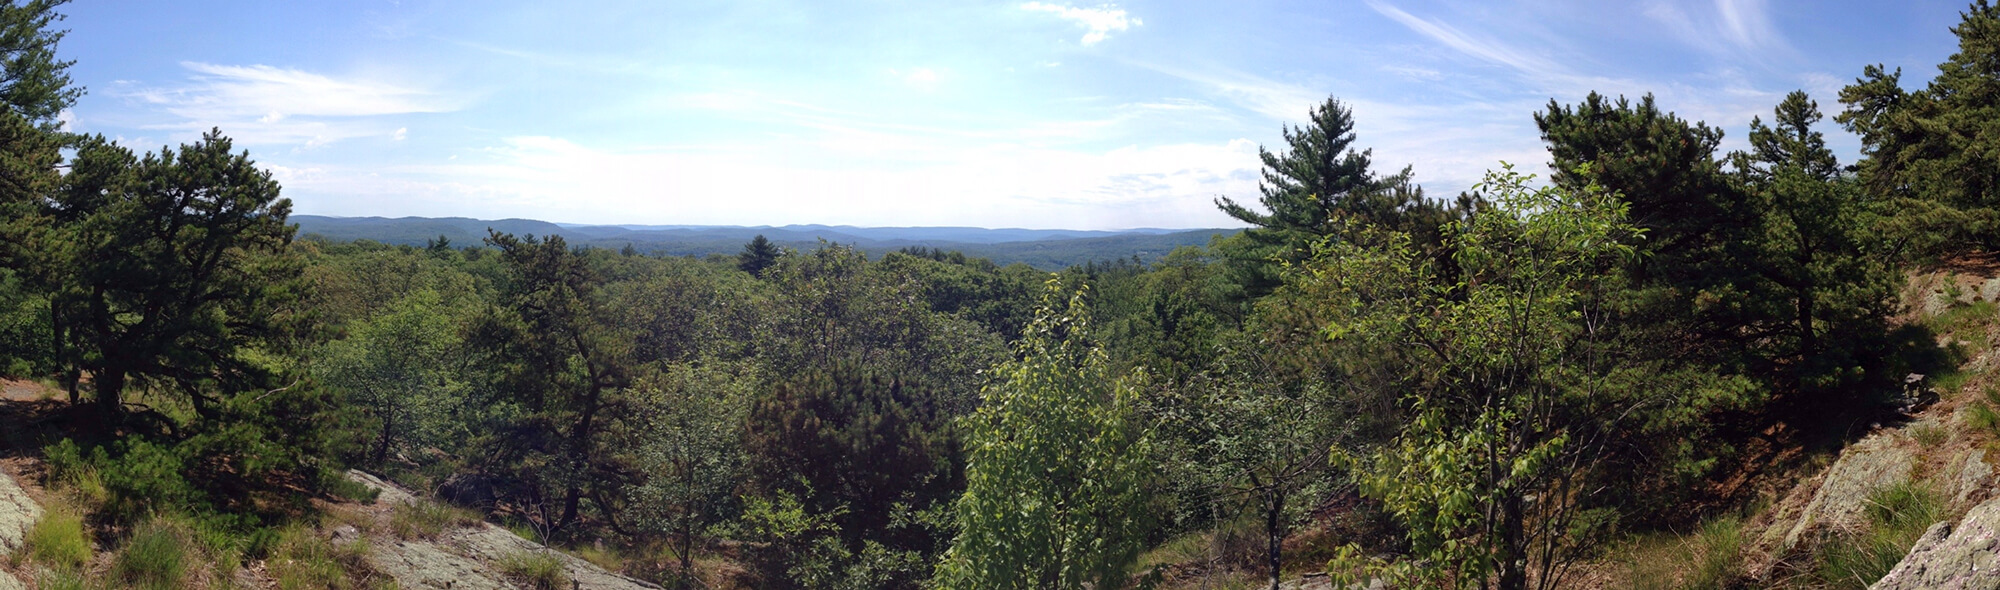 Panorama of a forest from a ridge